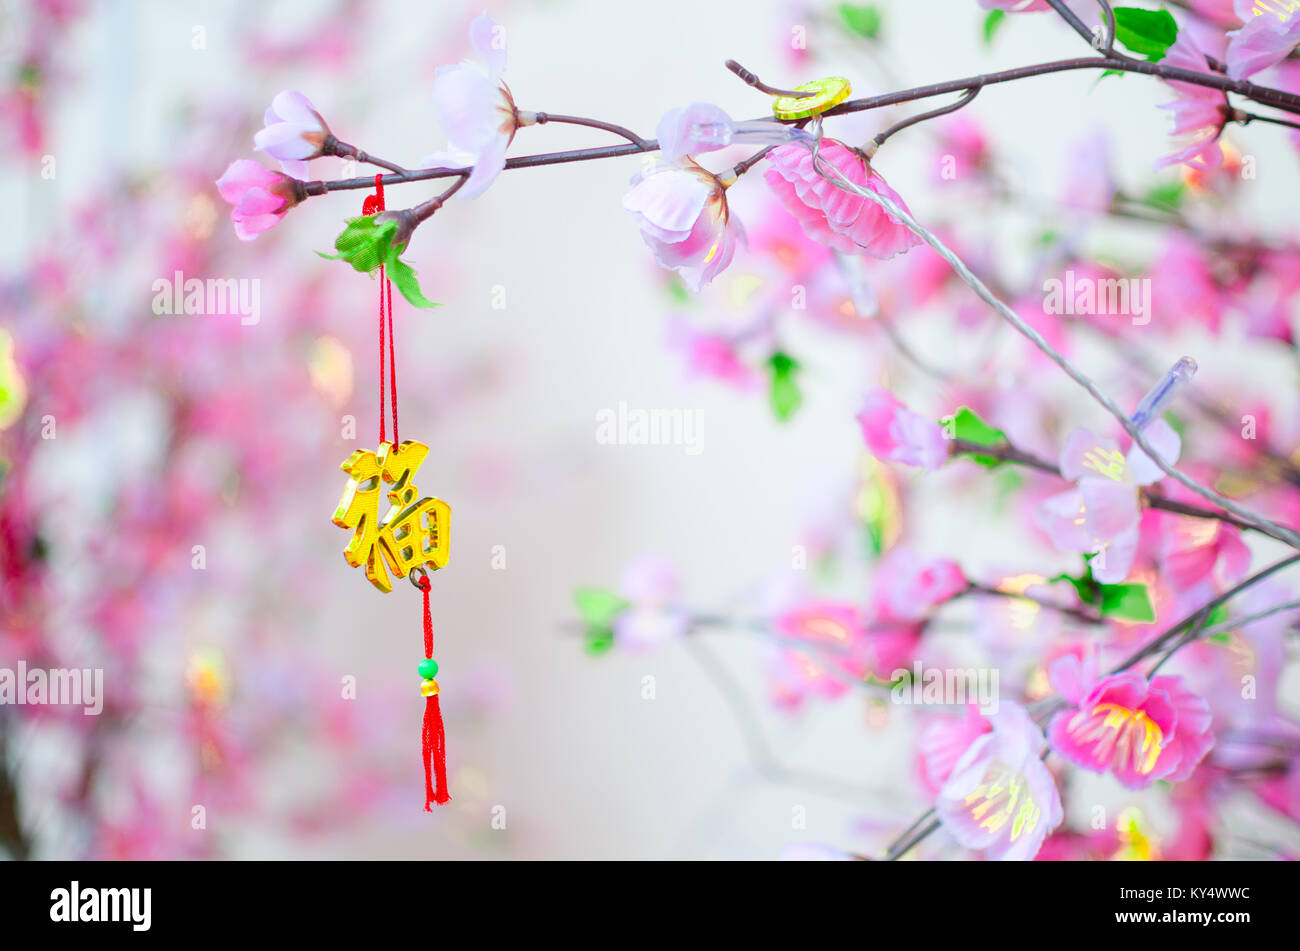 Prosperity. The character Fú (福）meaning 'fortune' or 'good luck'. Very common decoration during Chinese New Year. Stock Photo